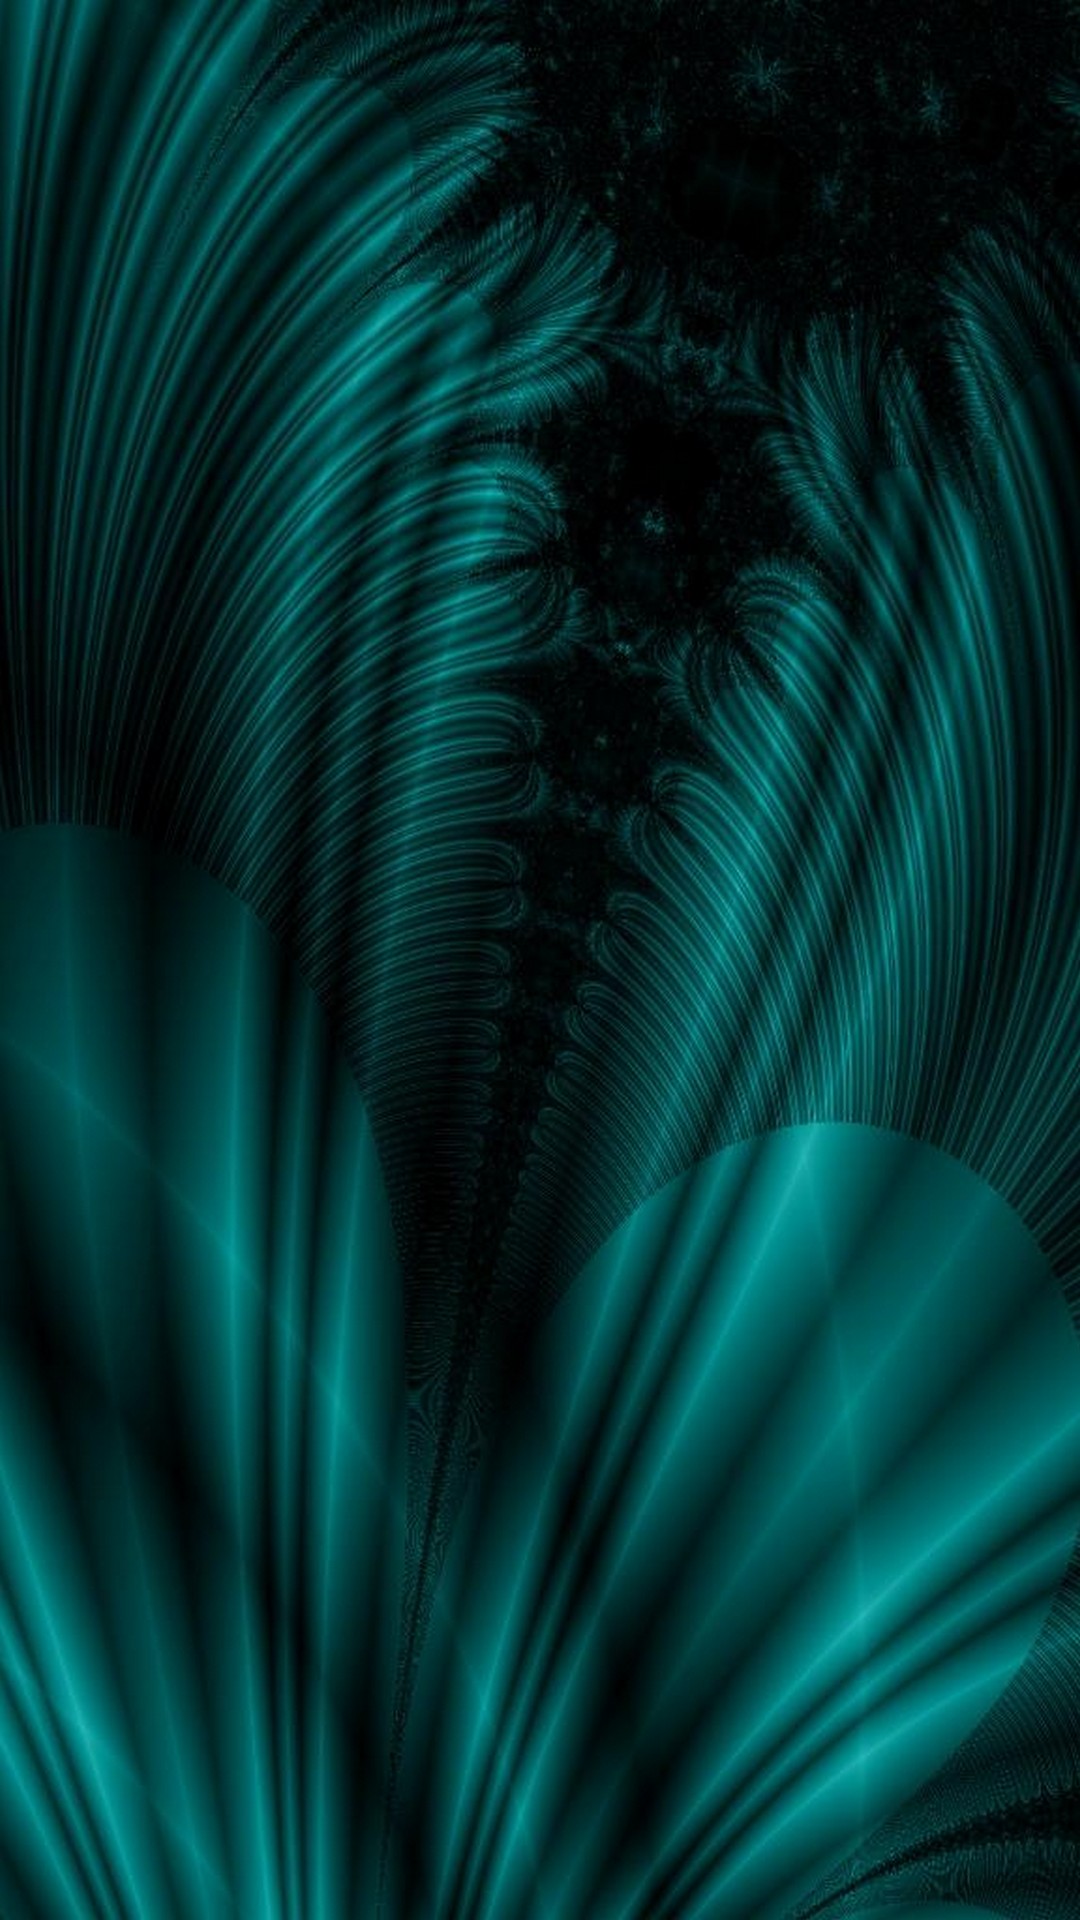 Wallpaper Dark Teal iPhone with image resolution 1080x1920 pixel. You can make this wallpaper for your iPhone 5, 6, 7, 8, X backgrounds, Mobile Screensaver, or iPad Lock Screen